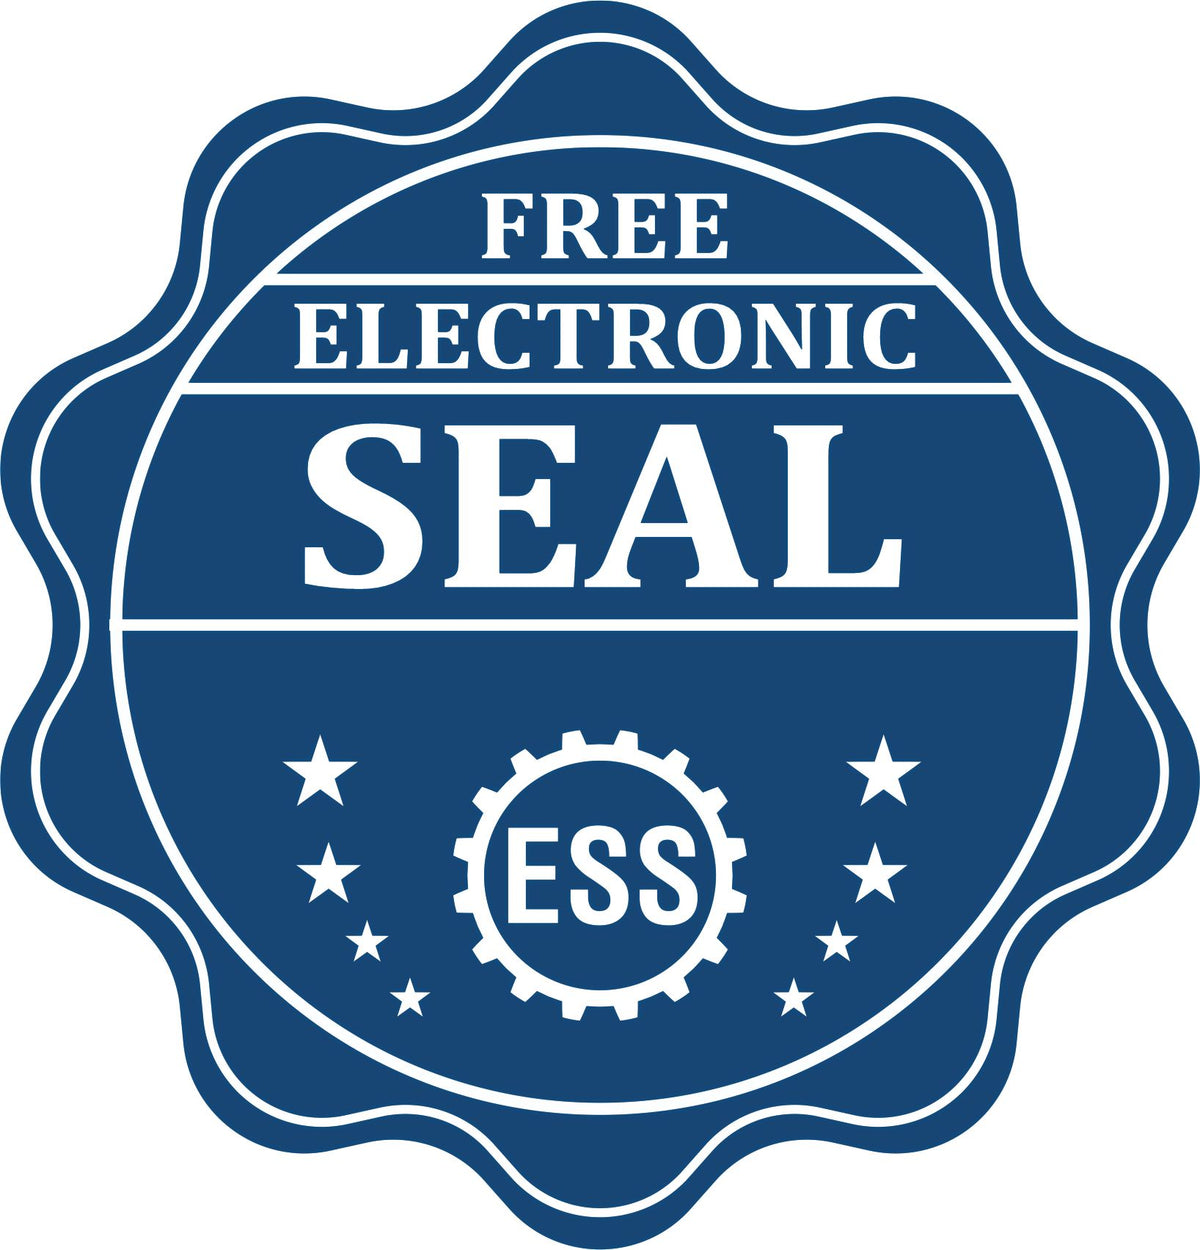 A badge showing a free electronic seal for the Handheld Delaware Land Surveyor Seal with stars and the ESS gear on the emblem.